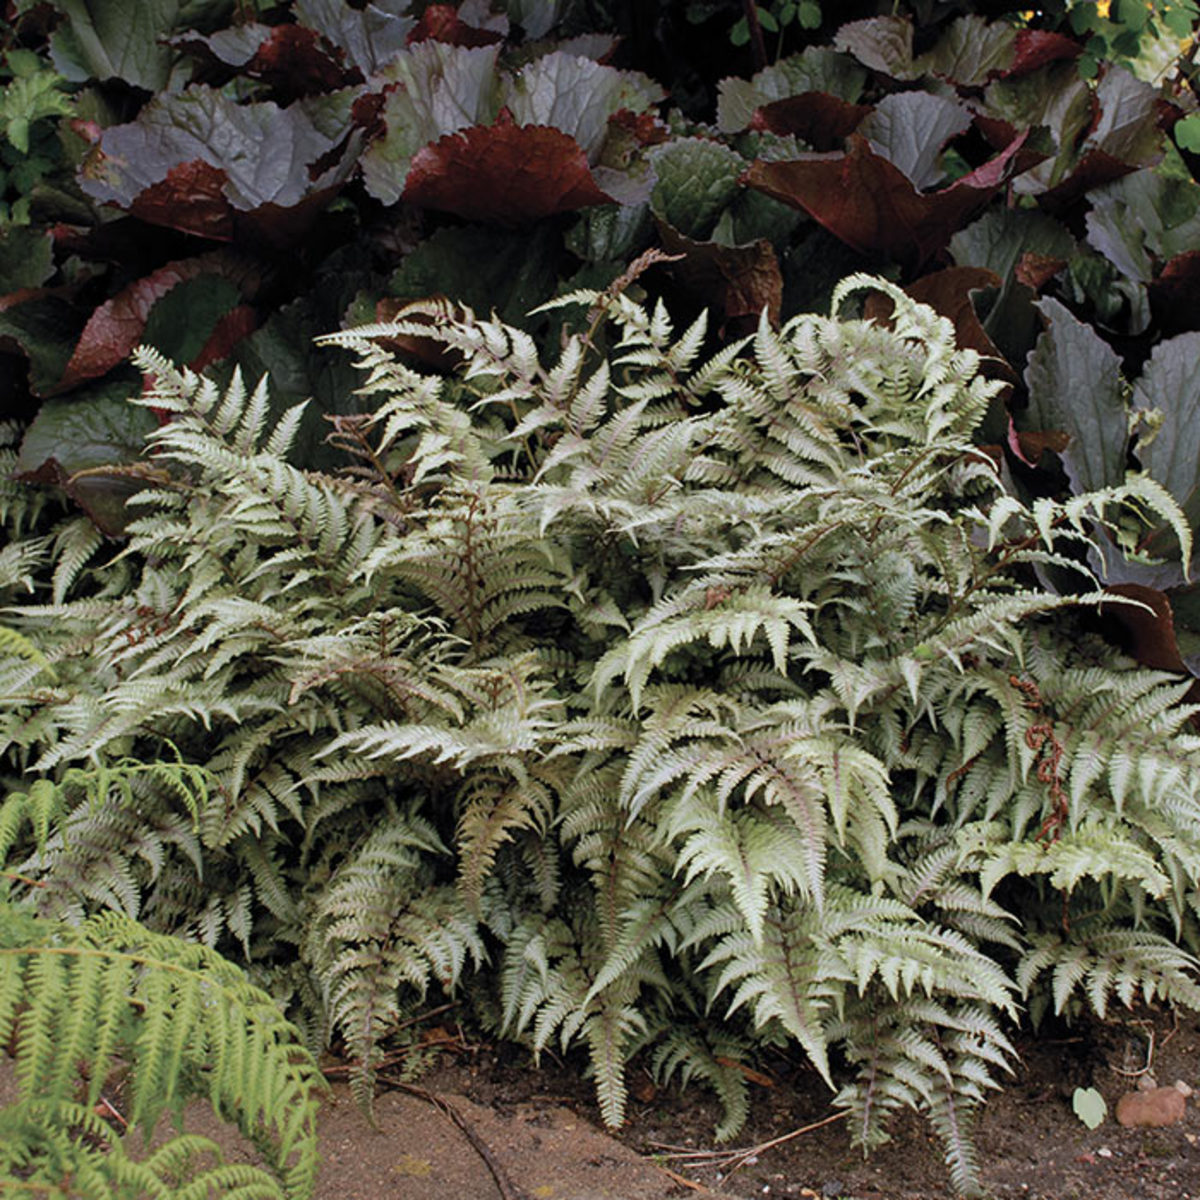 Japanese painted fern.